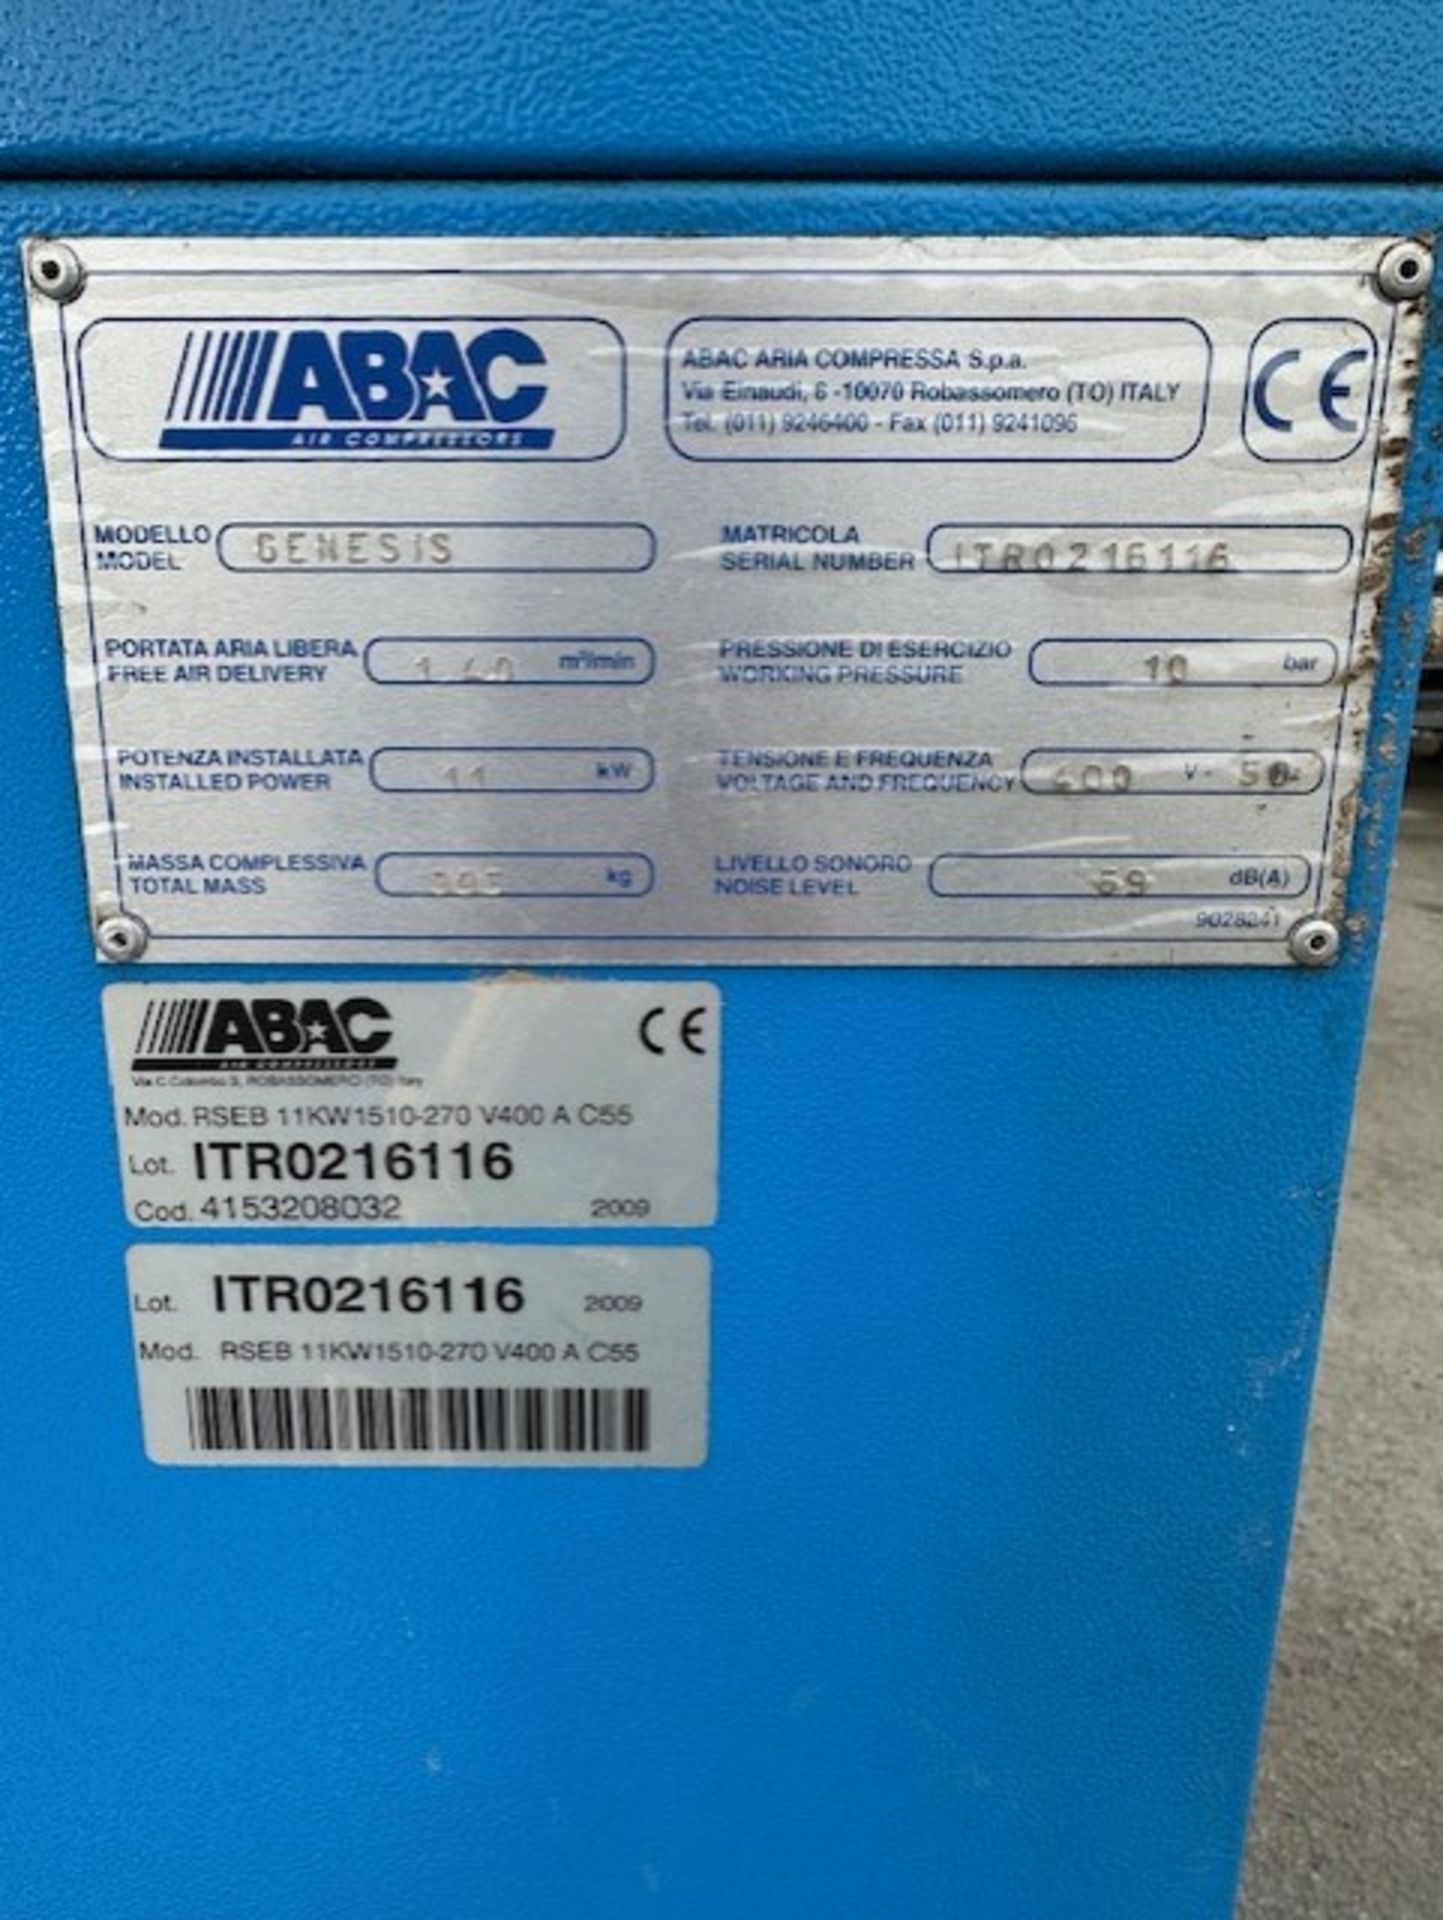 2009, ABAC Air Compressor - Image 2 of 5